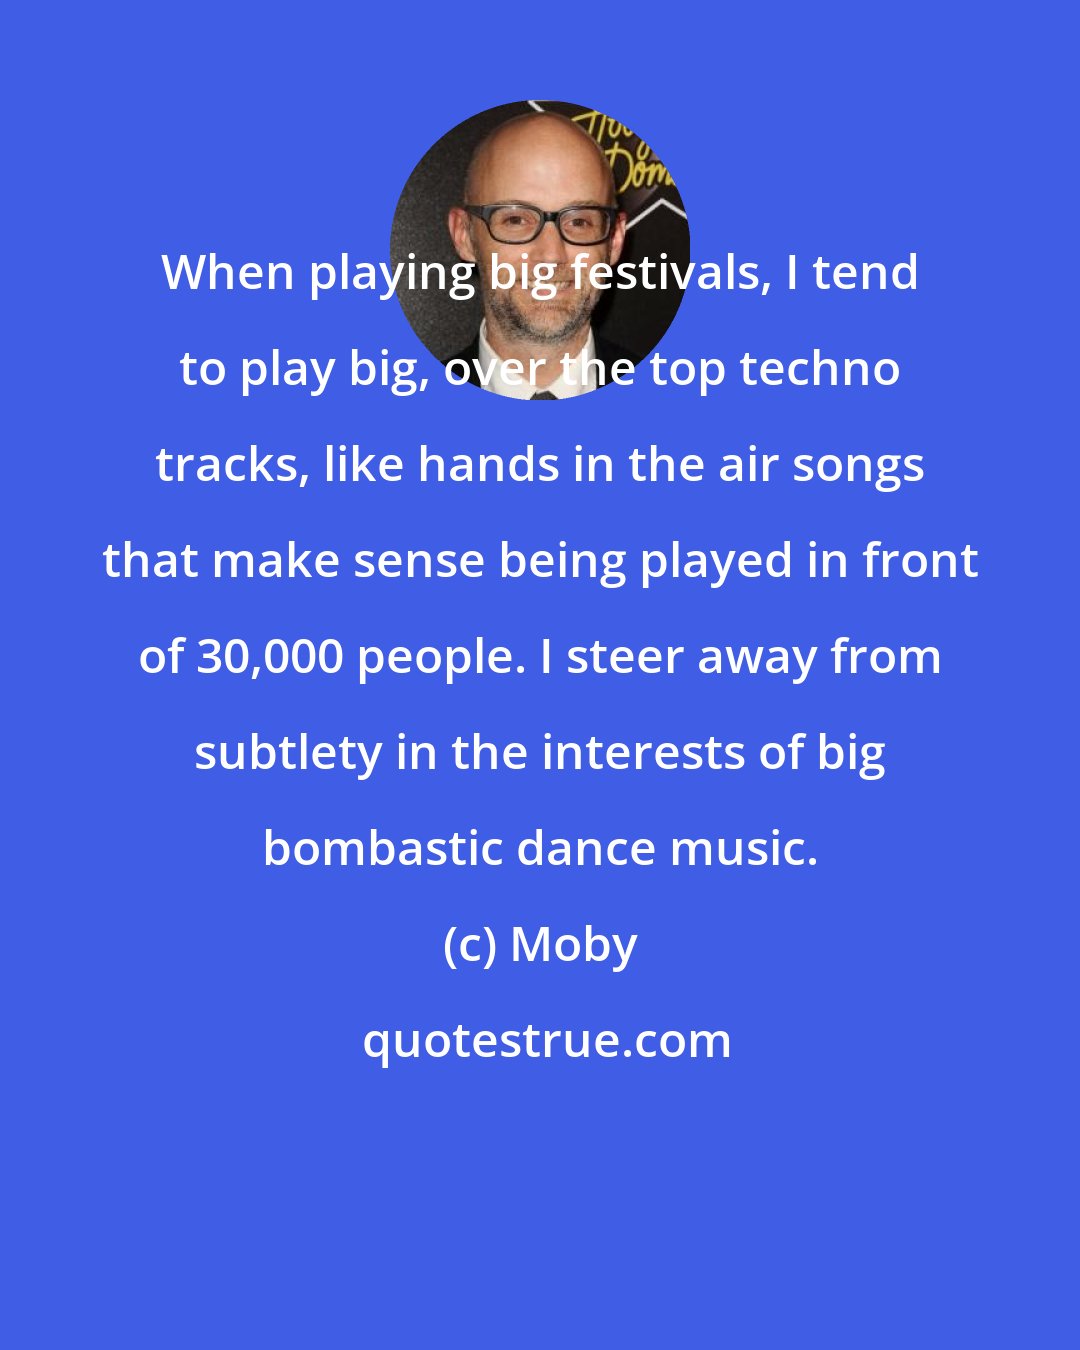 Moby: When playing big festivals, I tend to play big, over the top techno tracks, like hands in the air songs that make sense being played in front of 30,000 people. I steer away from subtlety in the interests of big bombastic dance music.